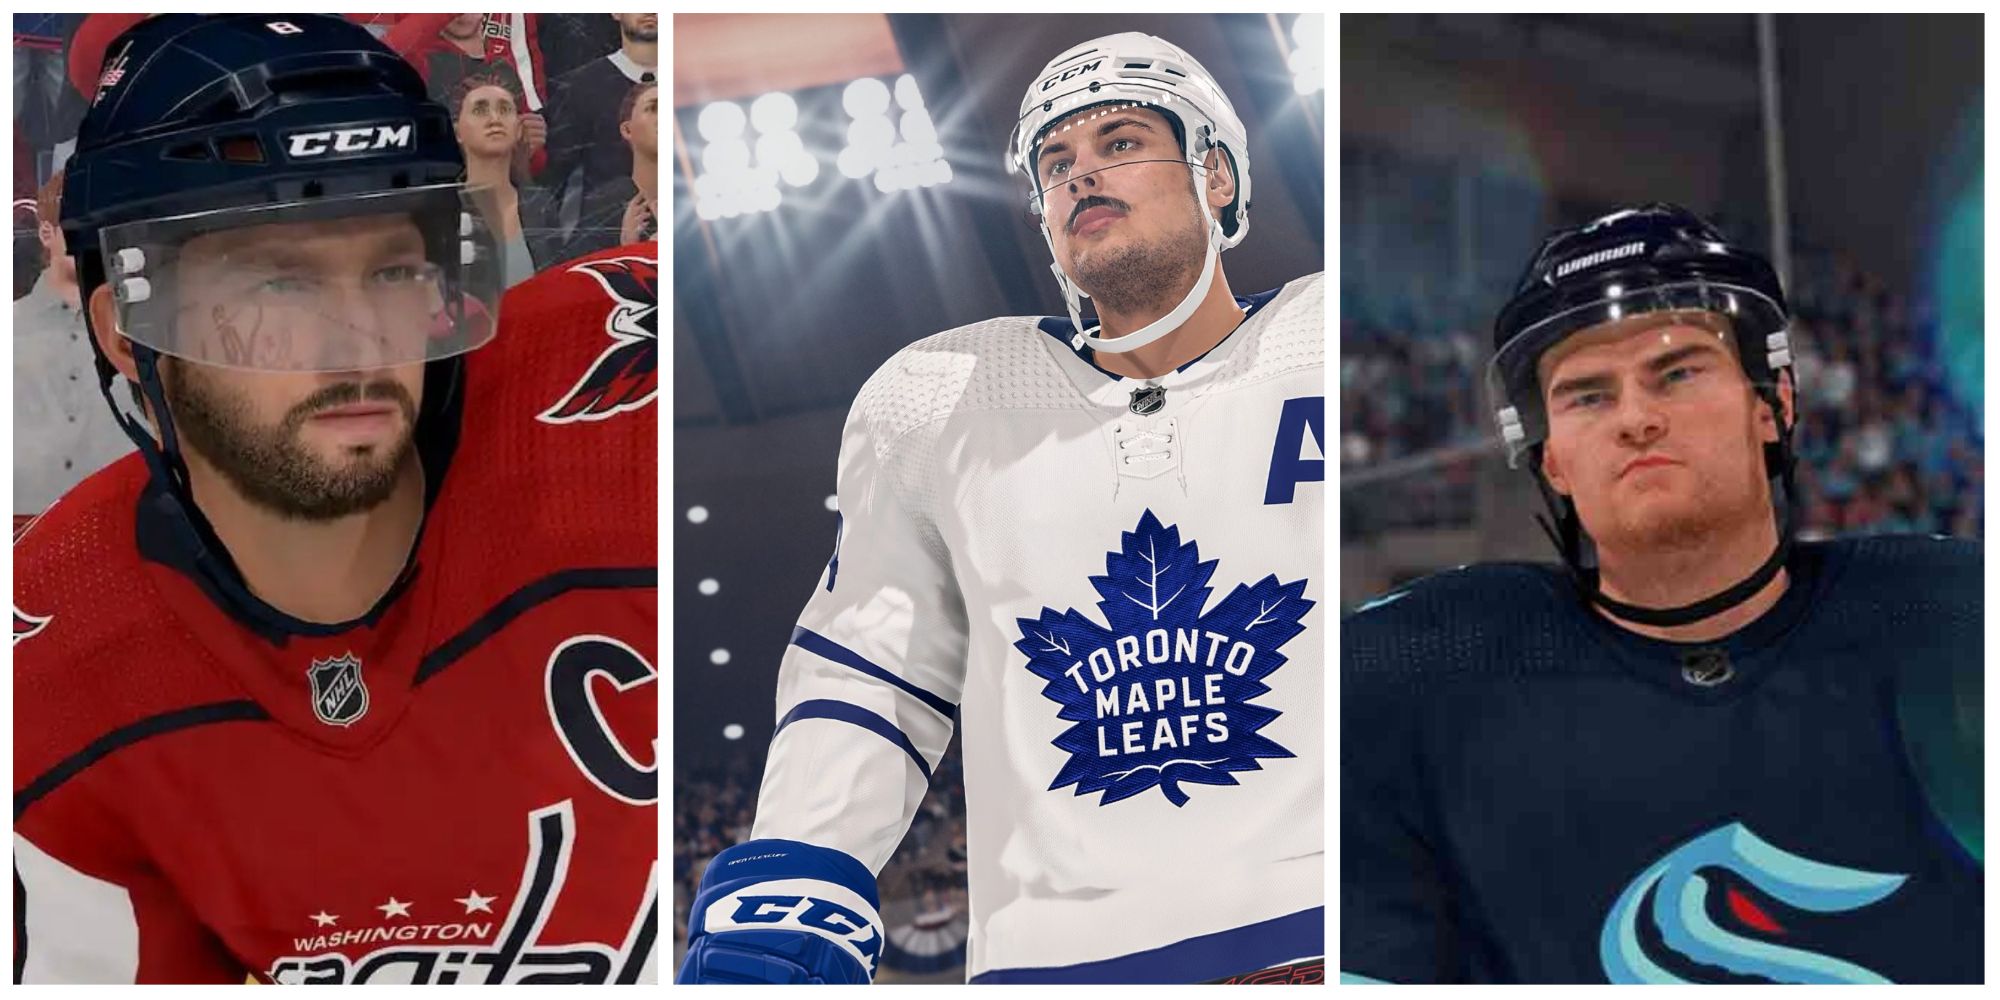 NHL 23 Franchise Mode Beginner's Guide to building your dynasty